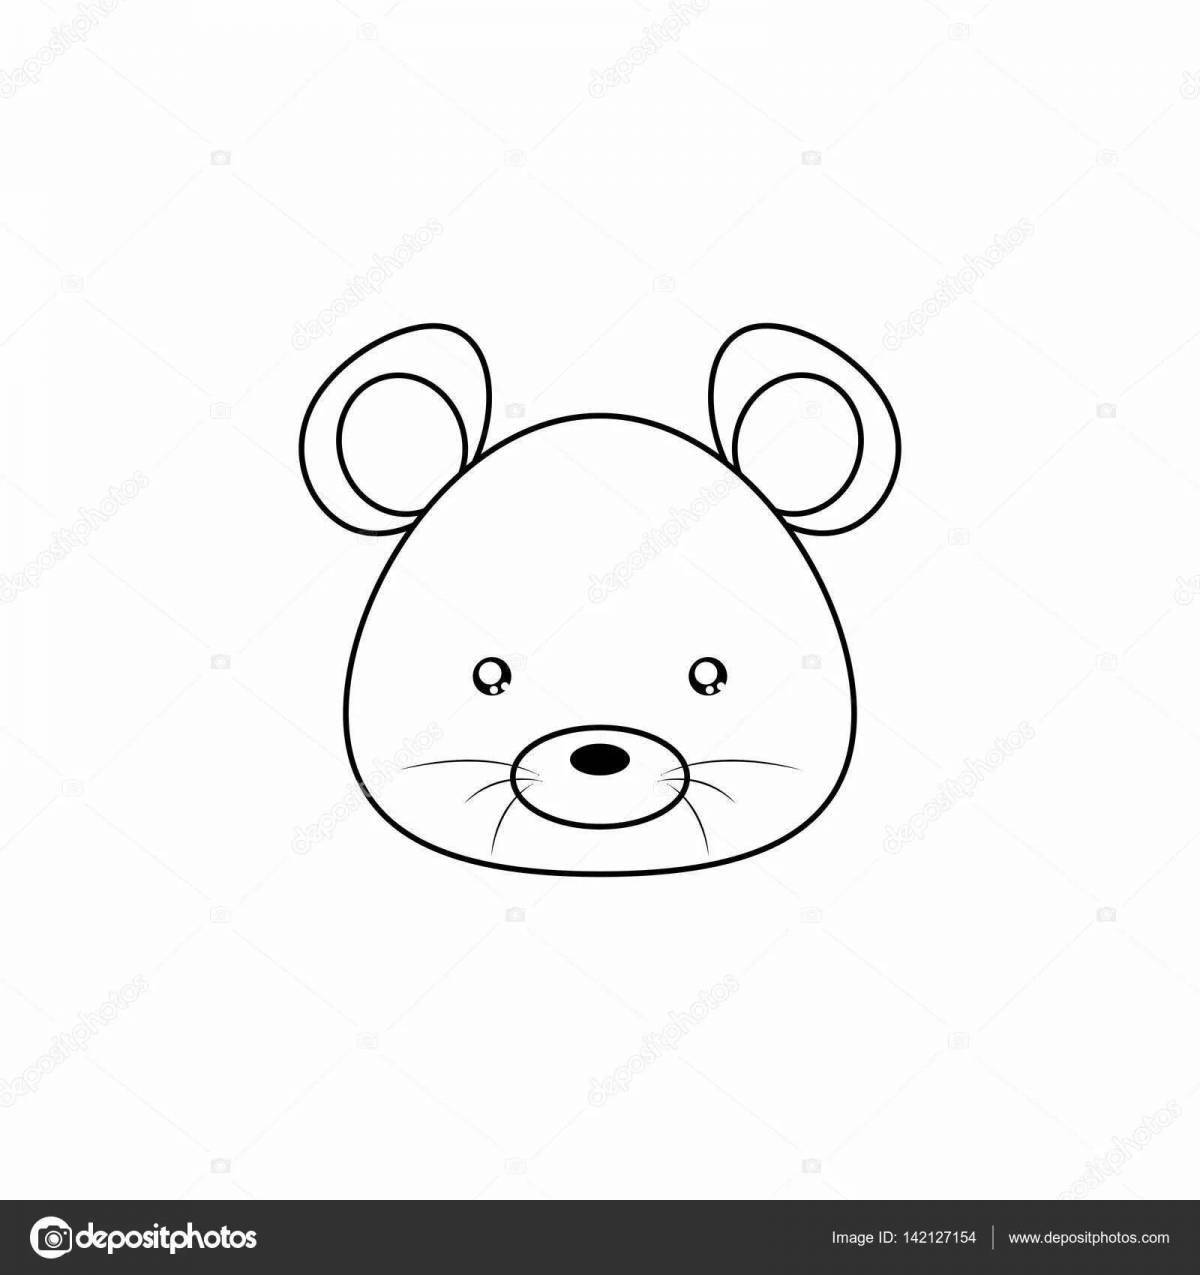 Animated mouse coloring page with glasses